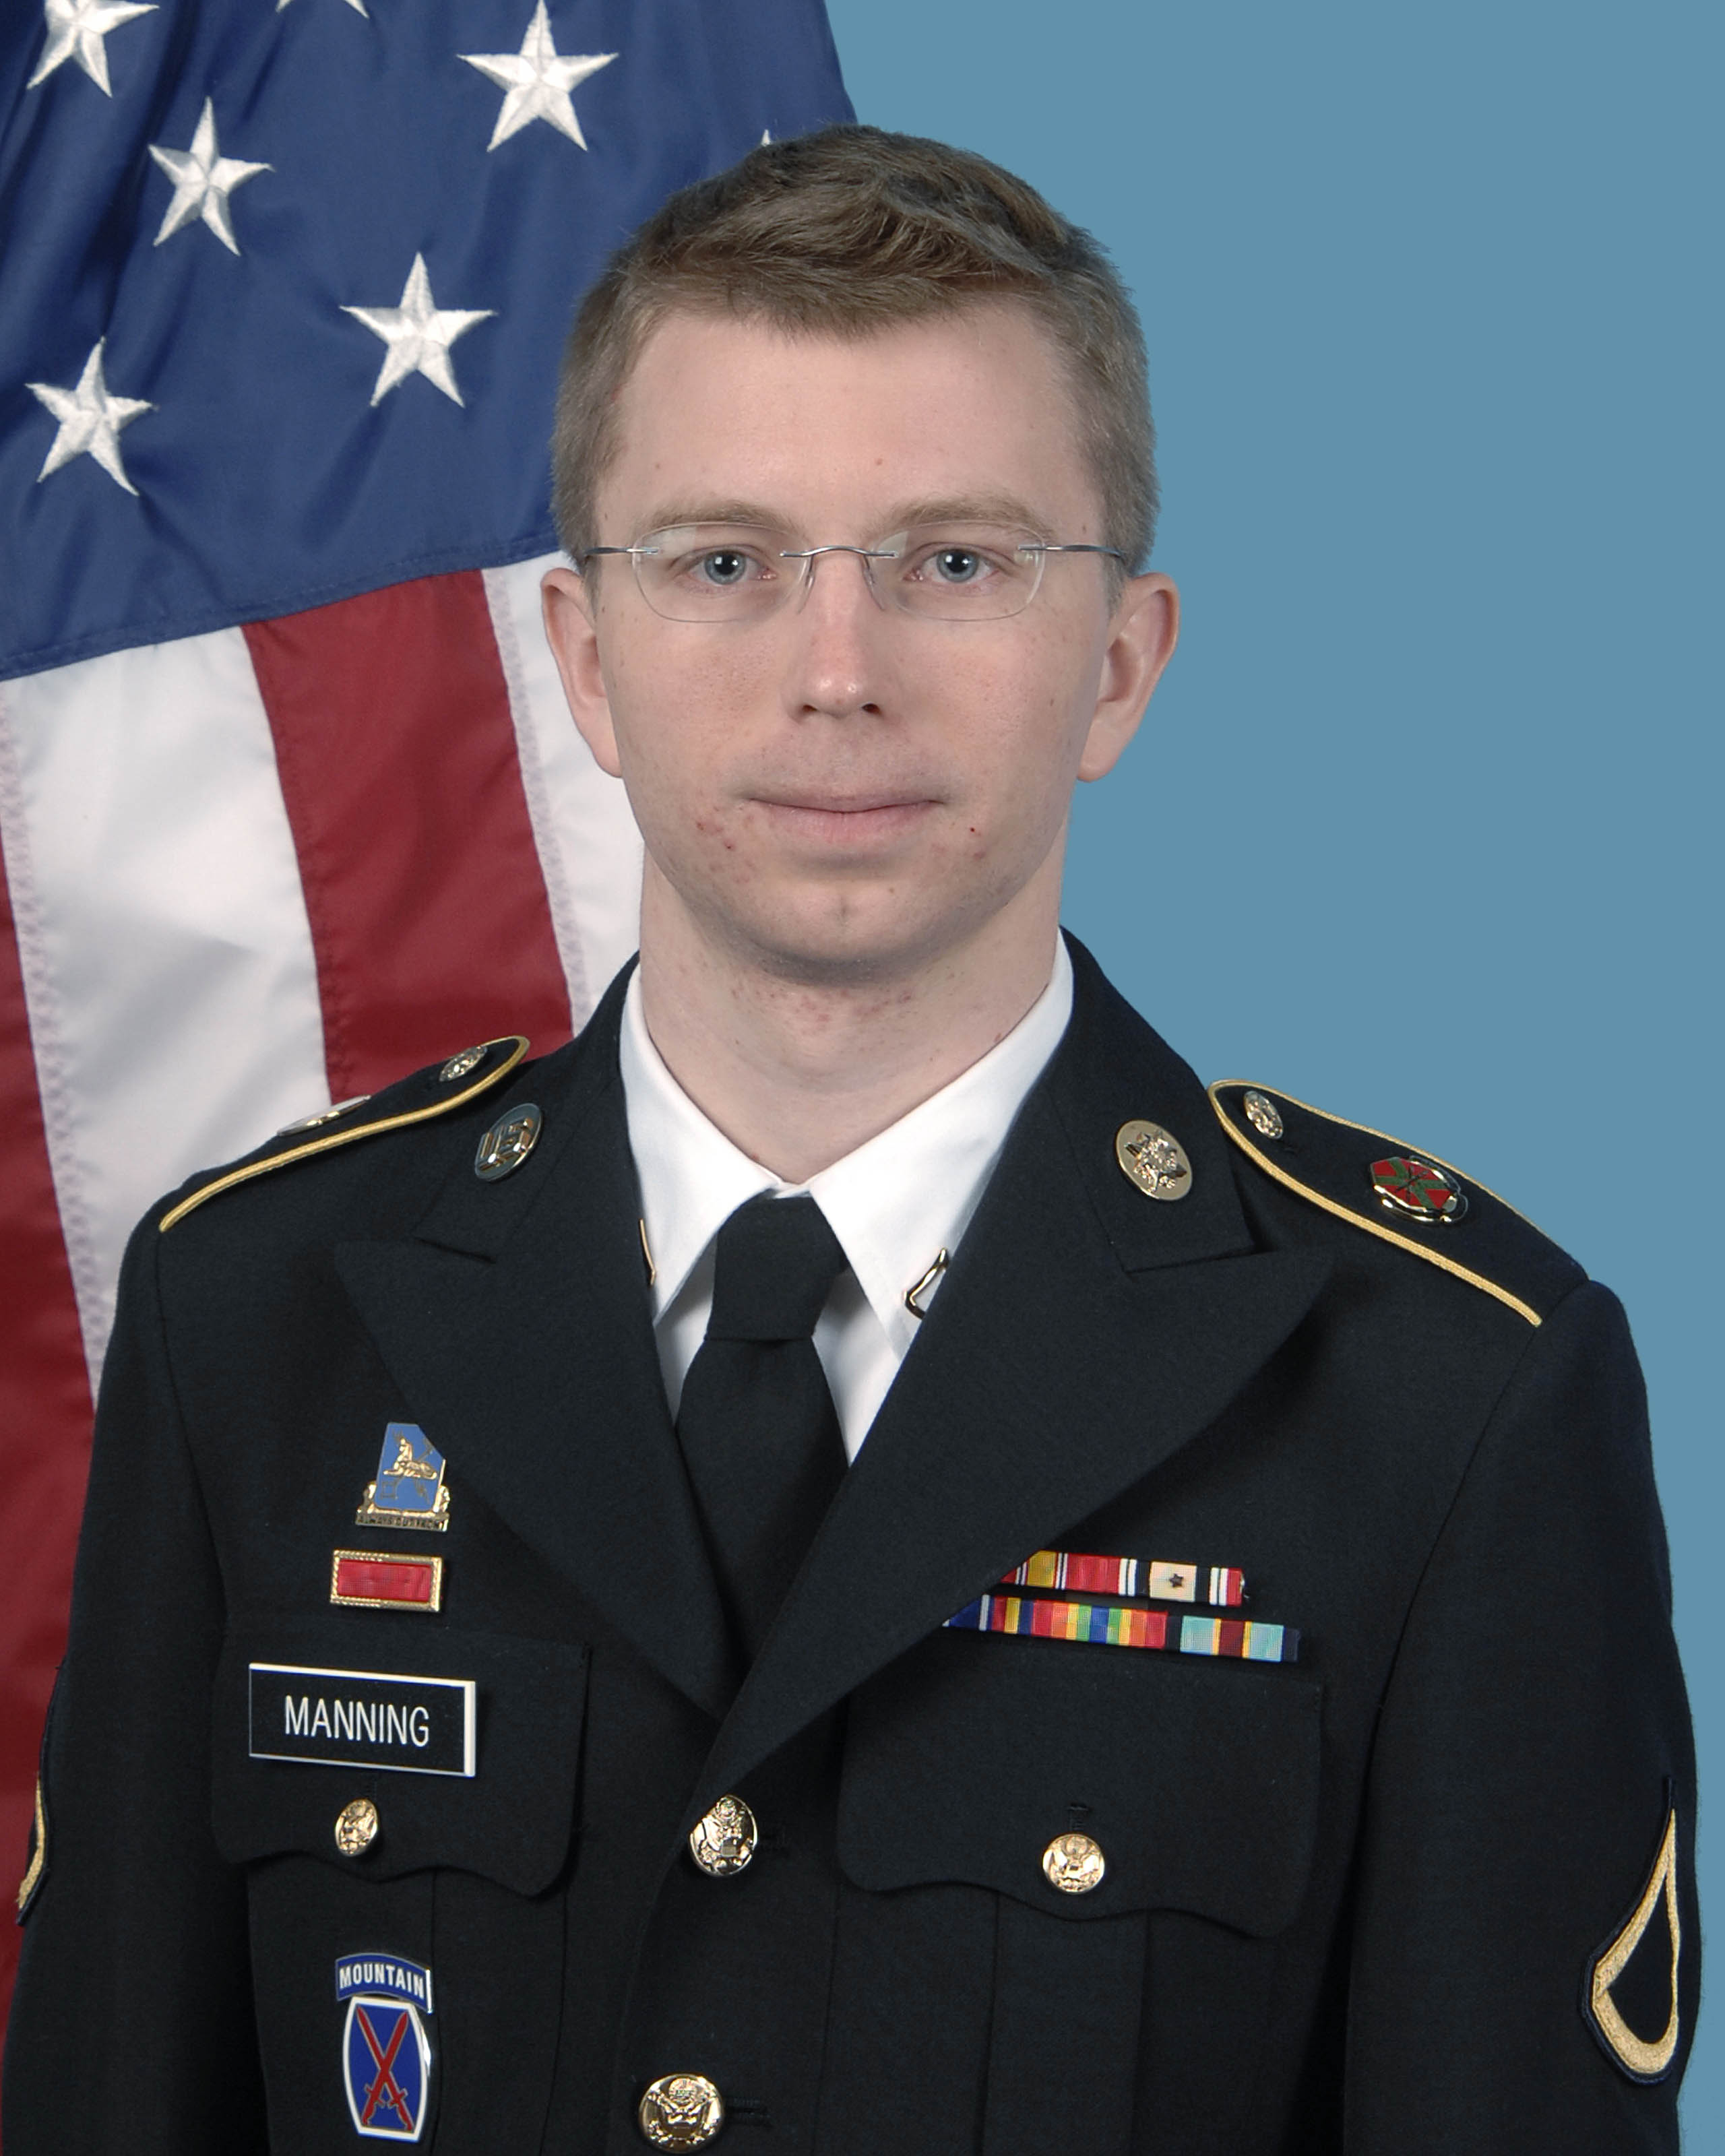 The Guardian home - Bradley Manning WikiLeaks trial 'dangerous' for civil liberties – experts